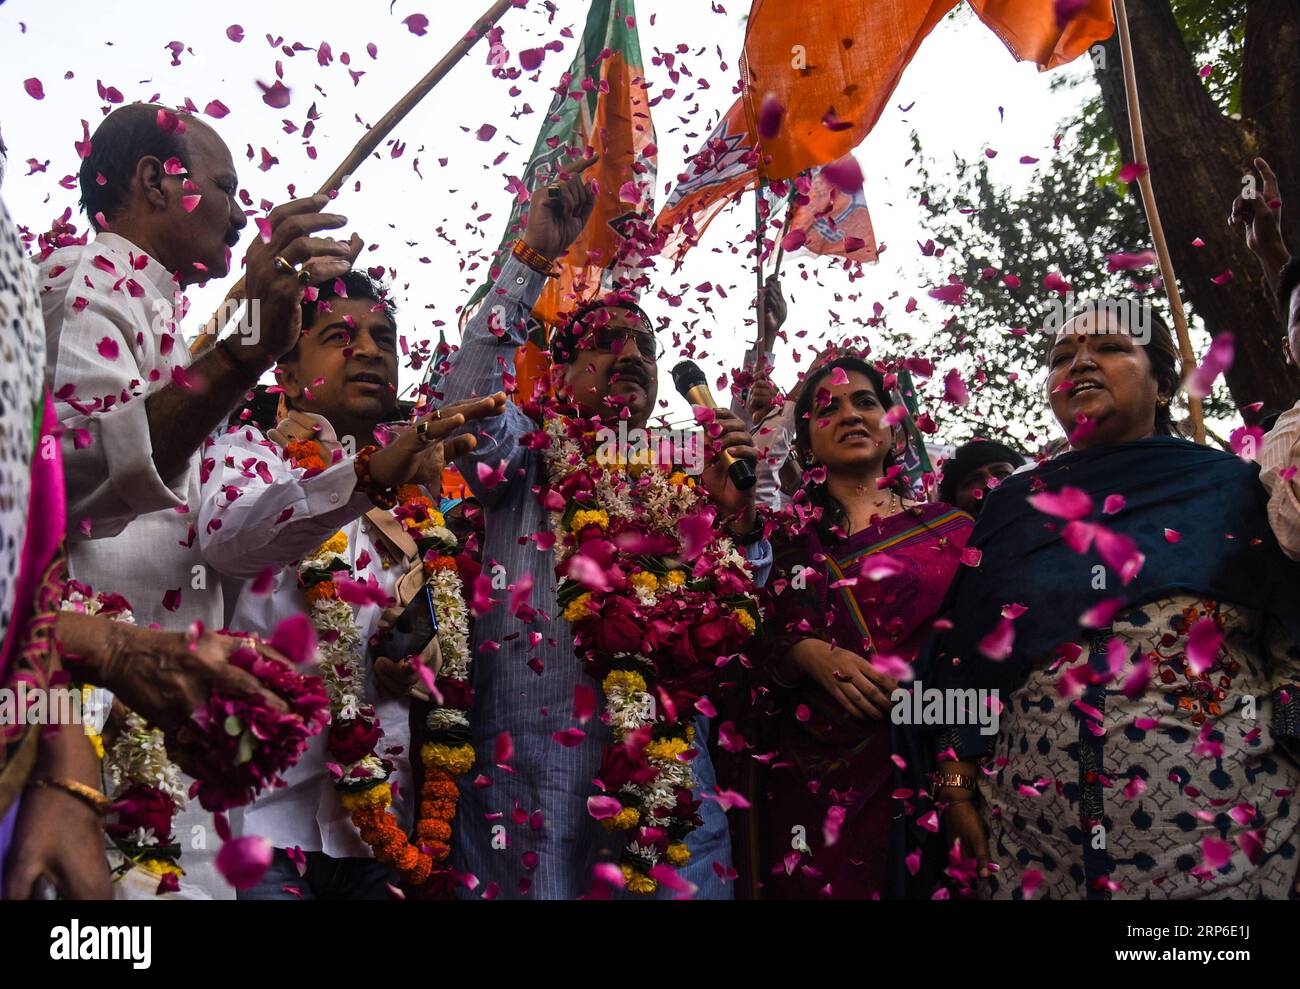 (190110) -- MUMBAI, Jan. 10, 2019 -- Members of the Bharatiya Janata Party celebrate the establishment of quota for poor upper-caste people in government jobs ahead of national elections, in Mumbai, India, Jan. 10, 2019. ) INDIA-MUMBAI-BHARATIYA JANATA PARTY CELEBRATION Stringer PUBLICATIONxNOTxINxCHN Stock Photo